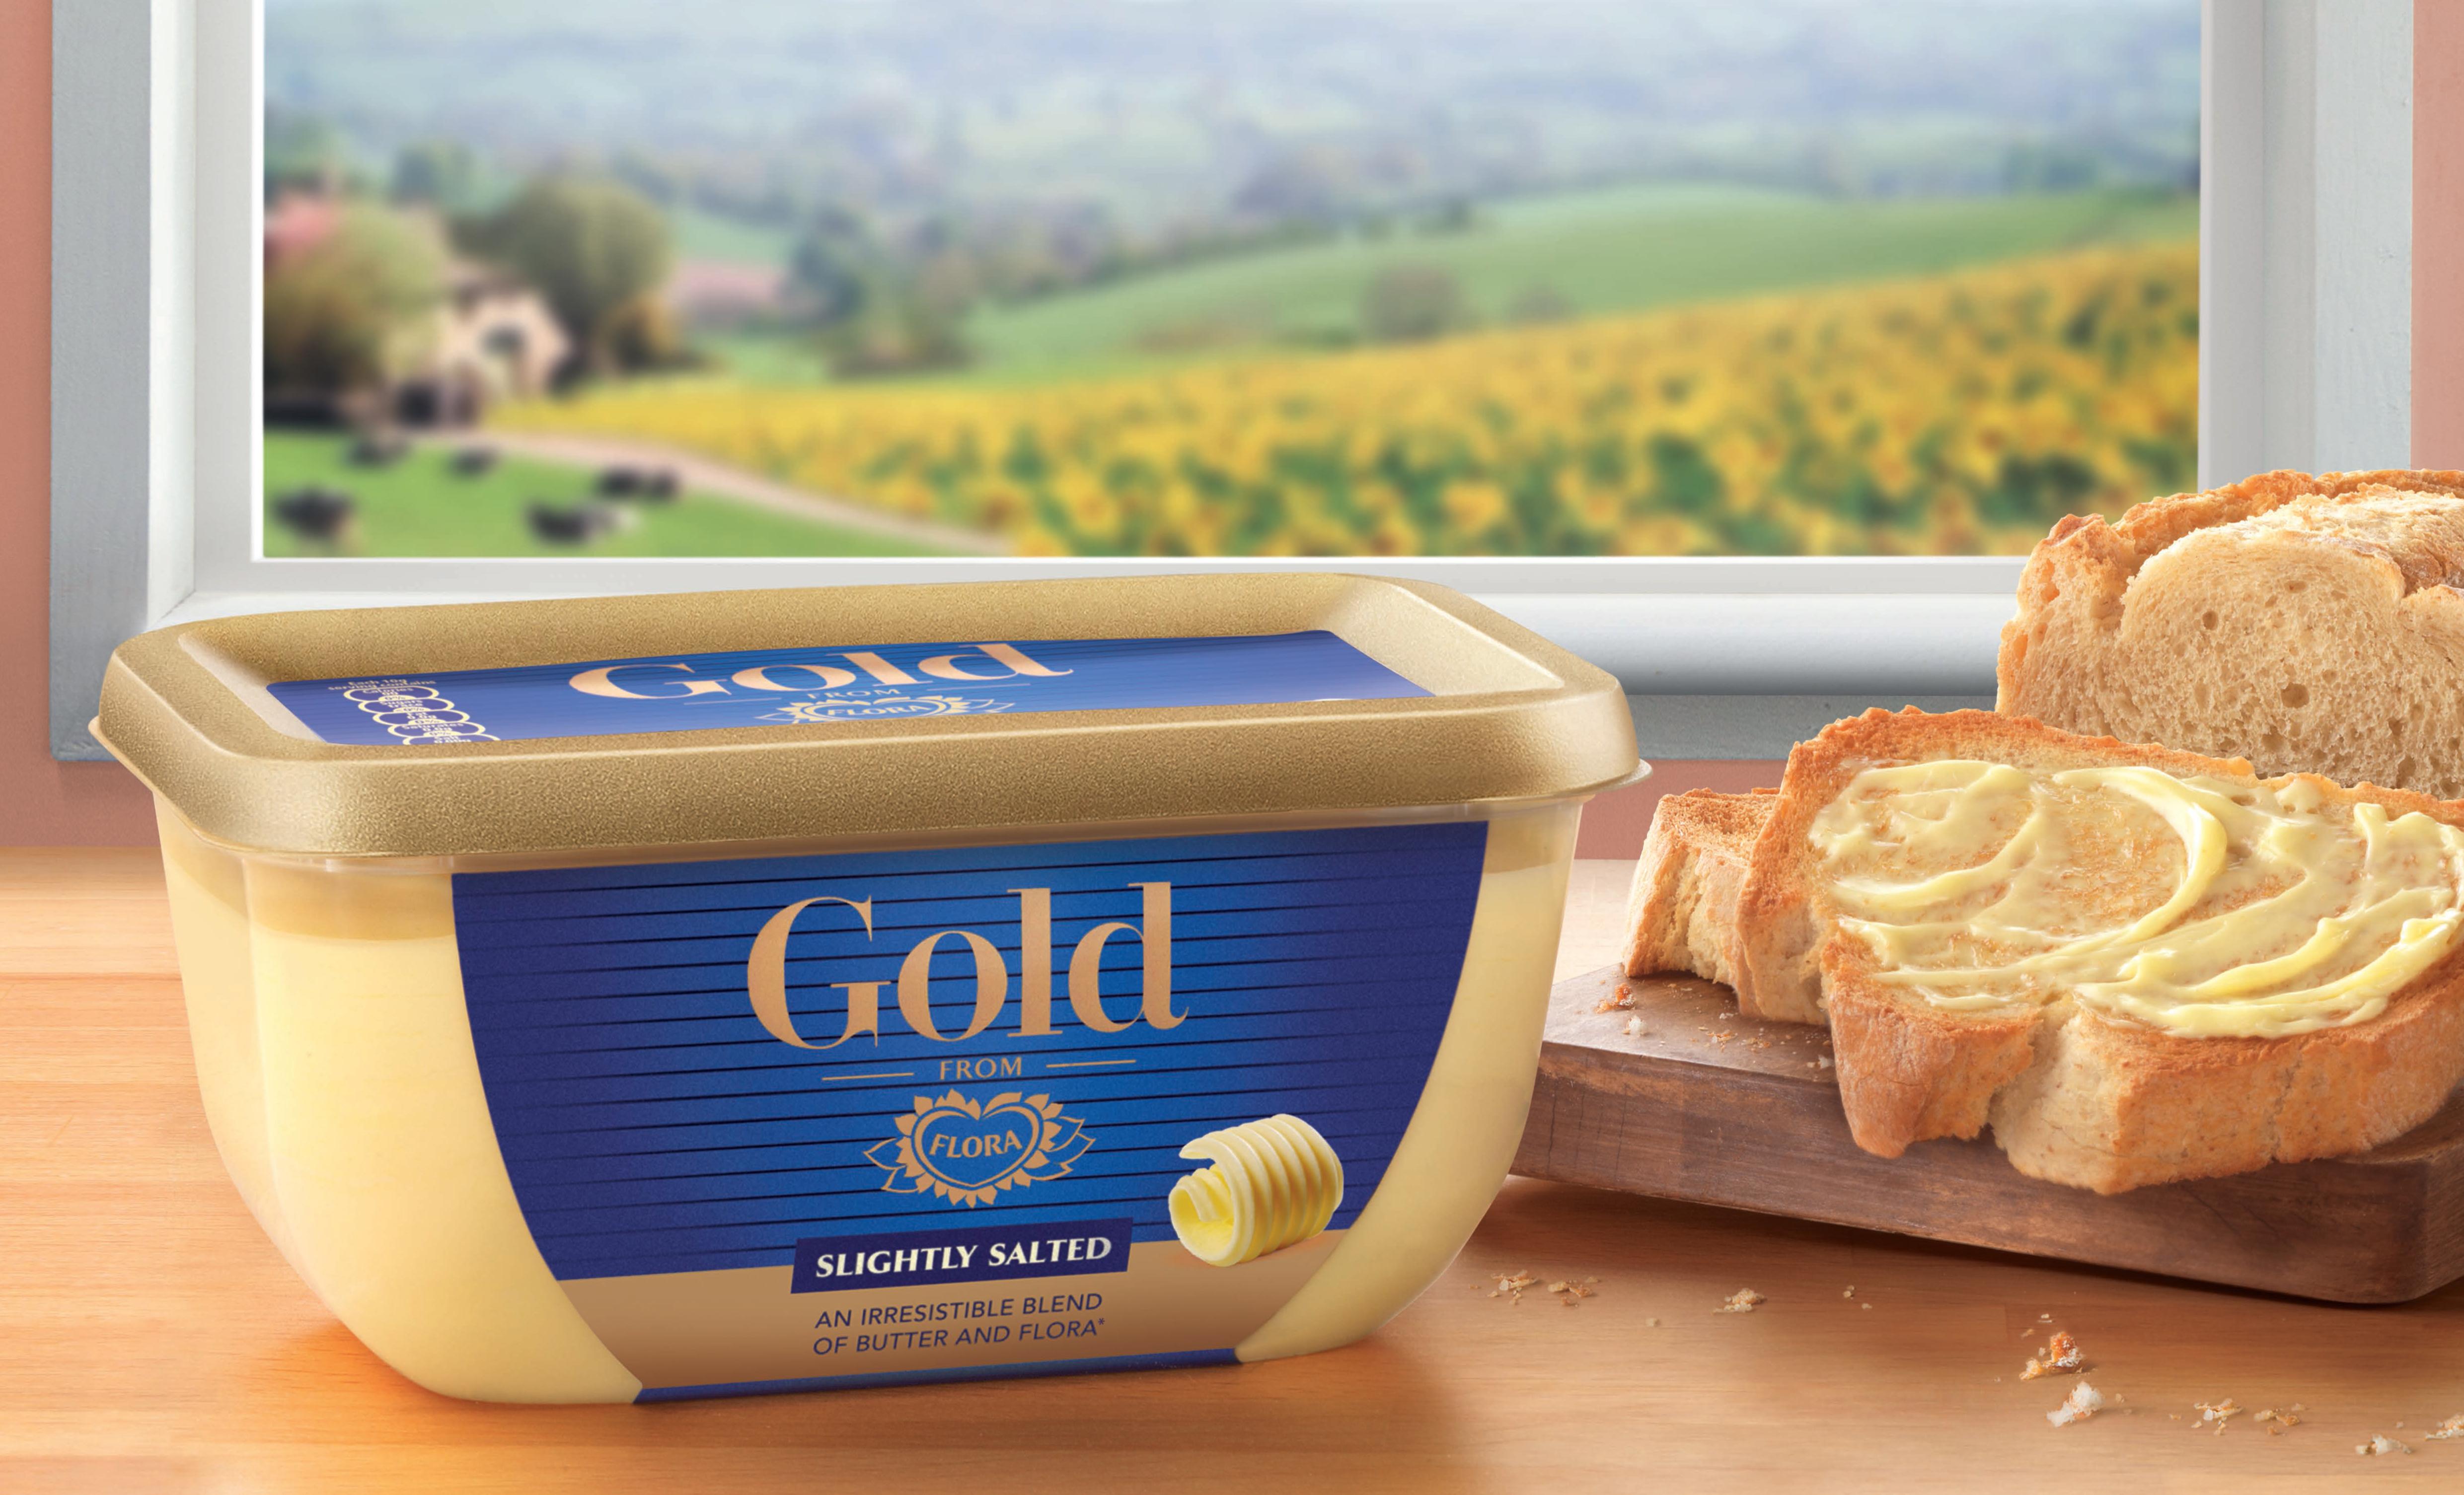 New Gold from Flora is a blend of butter and Flora